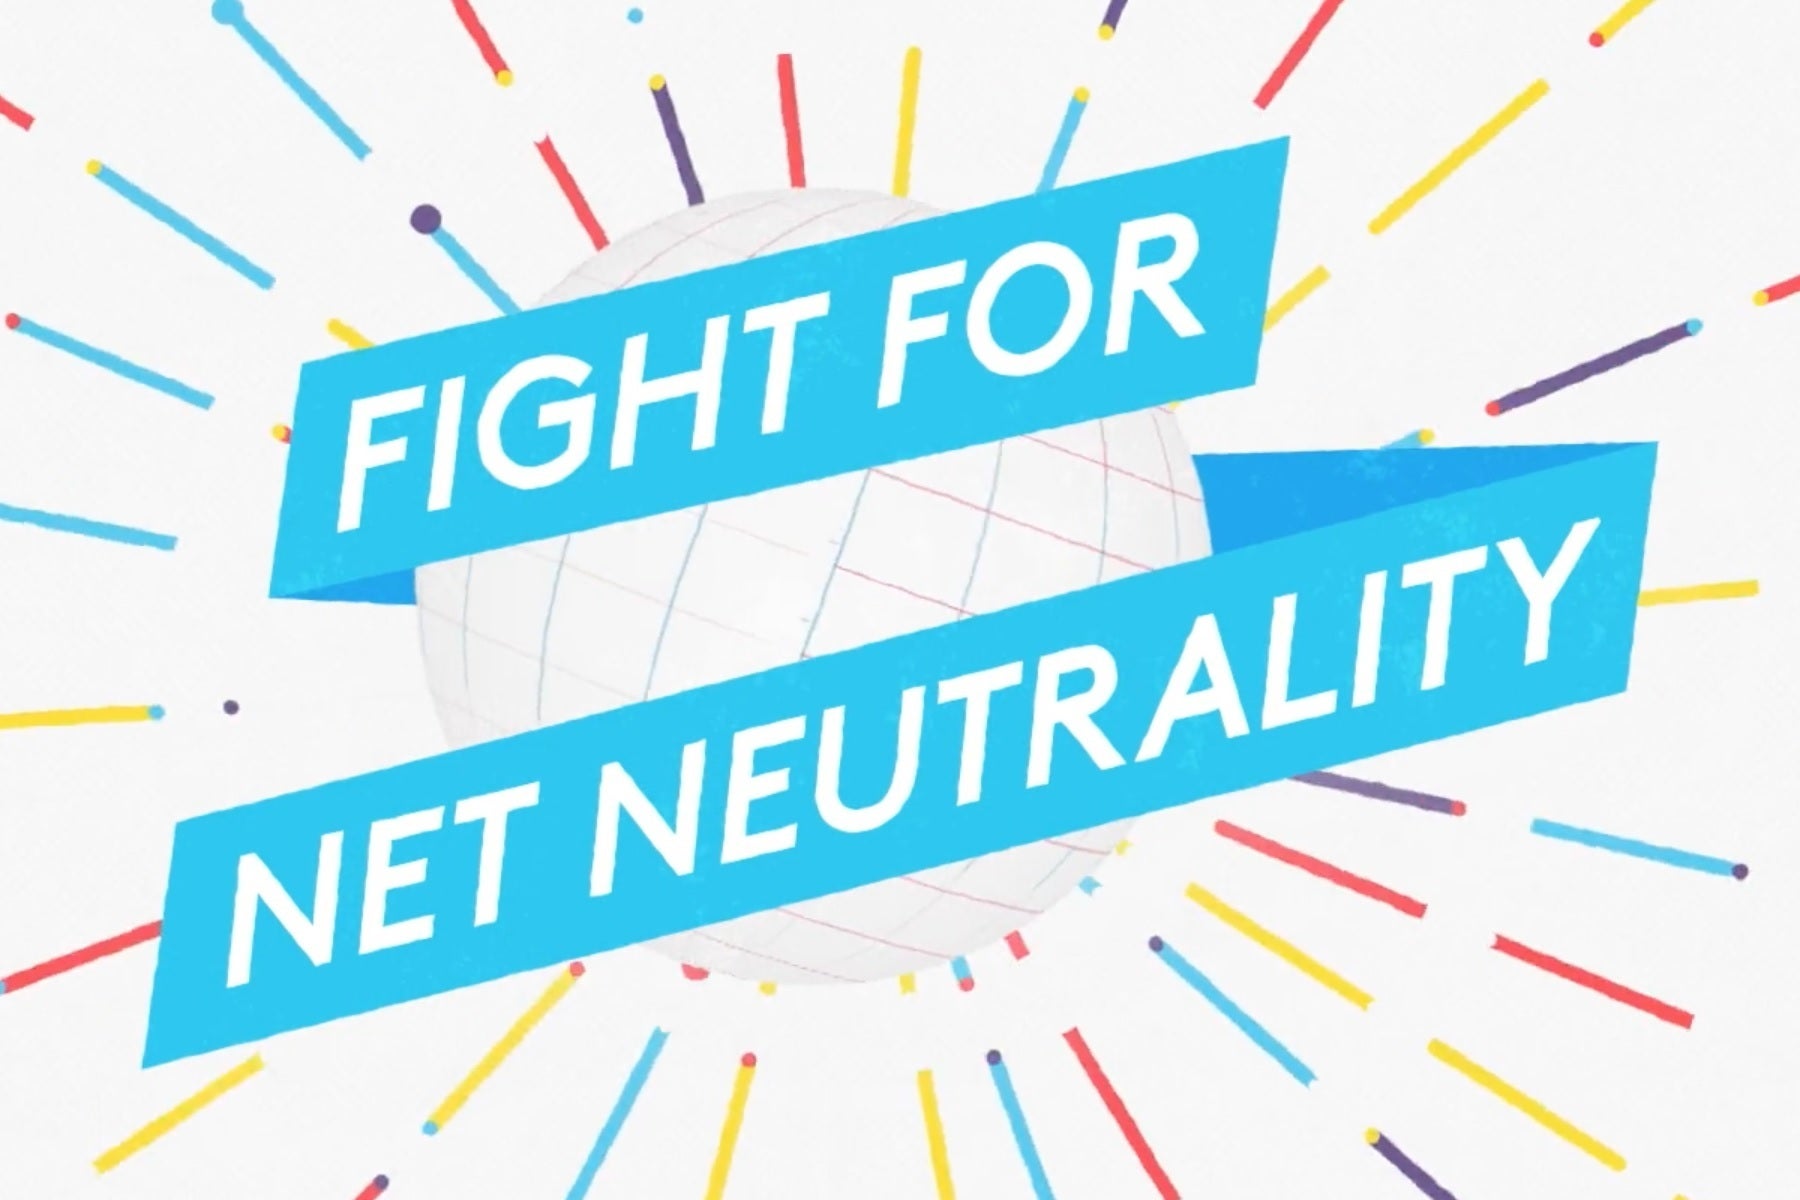 Net Neutrality The July 12 Day of Action protest and